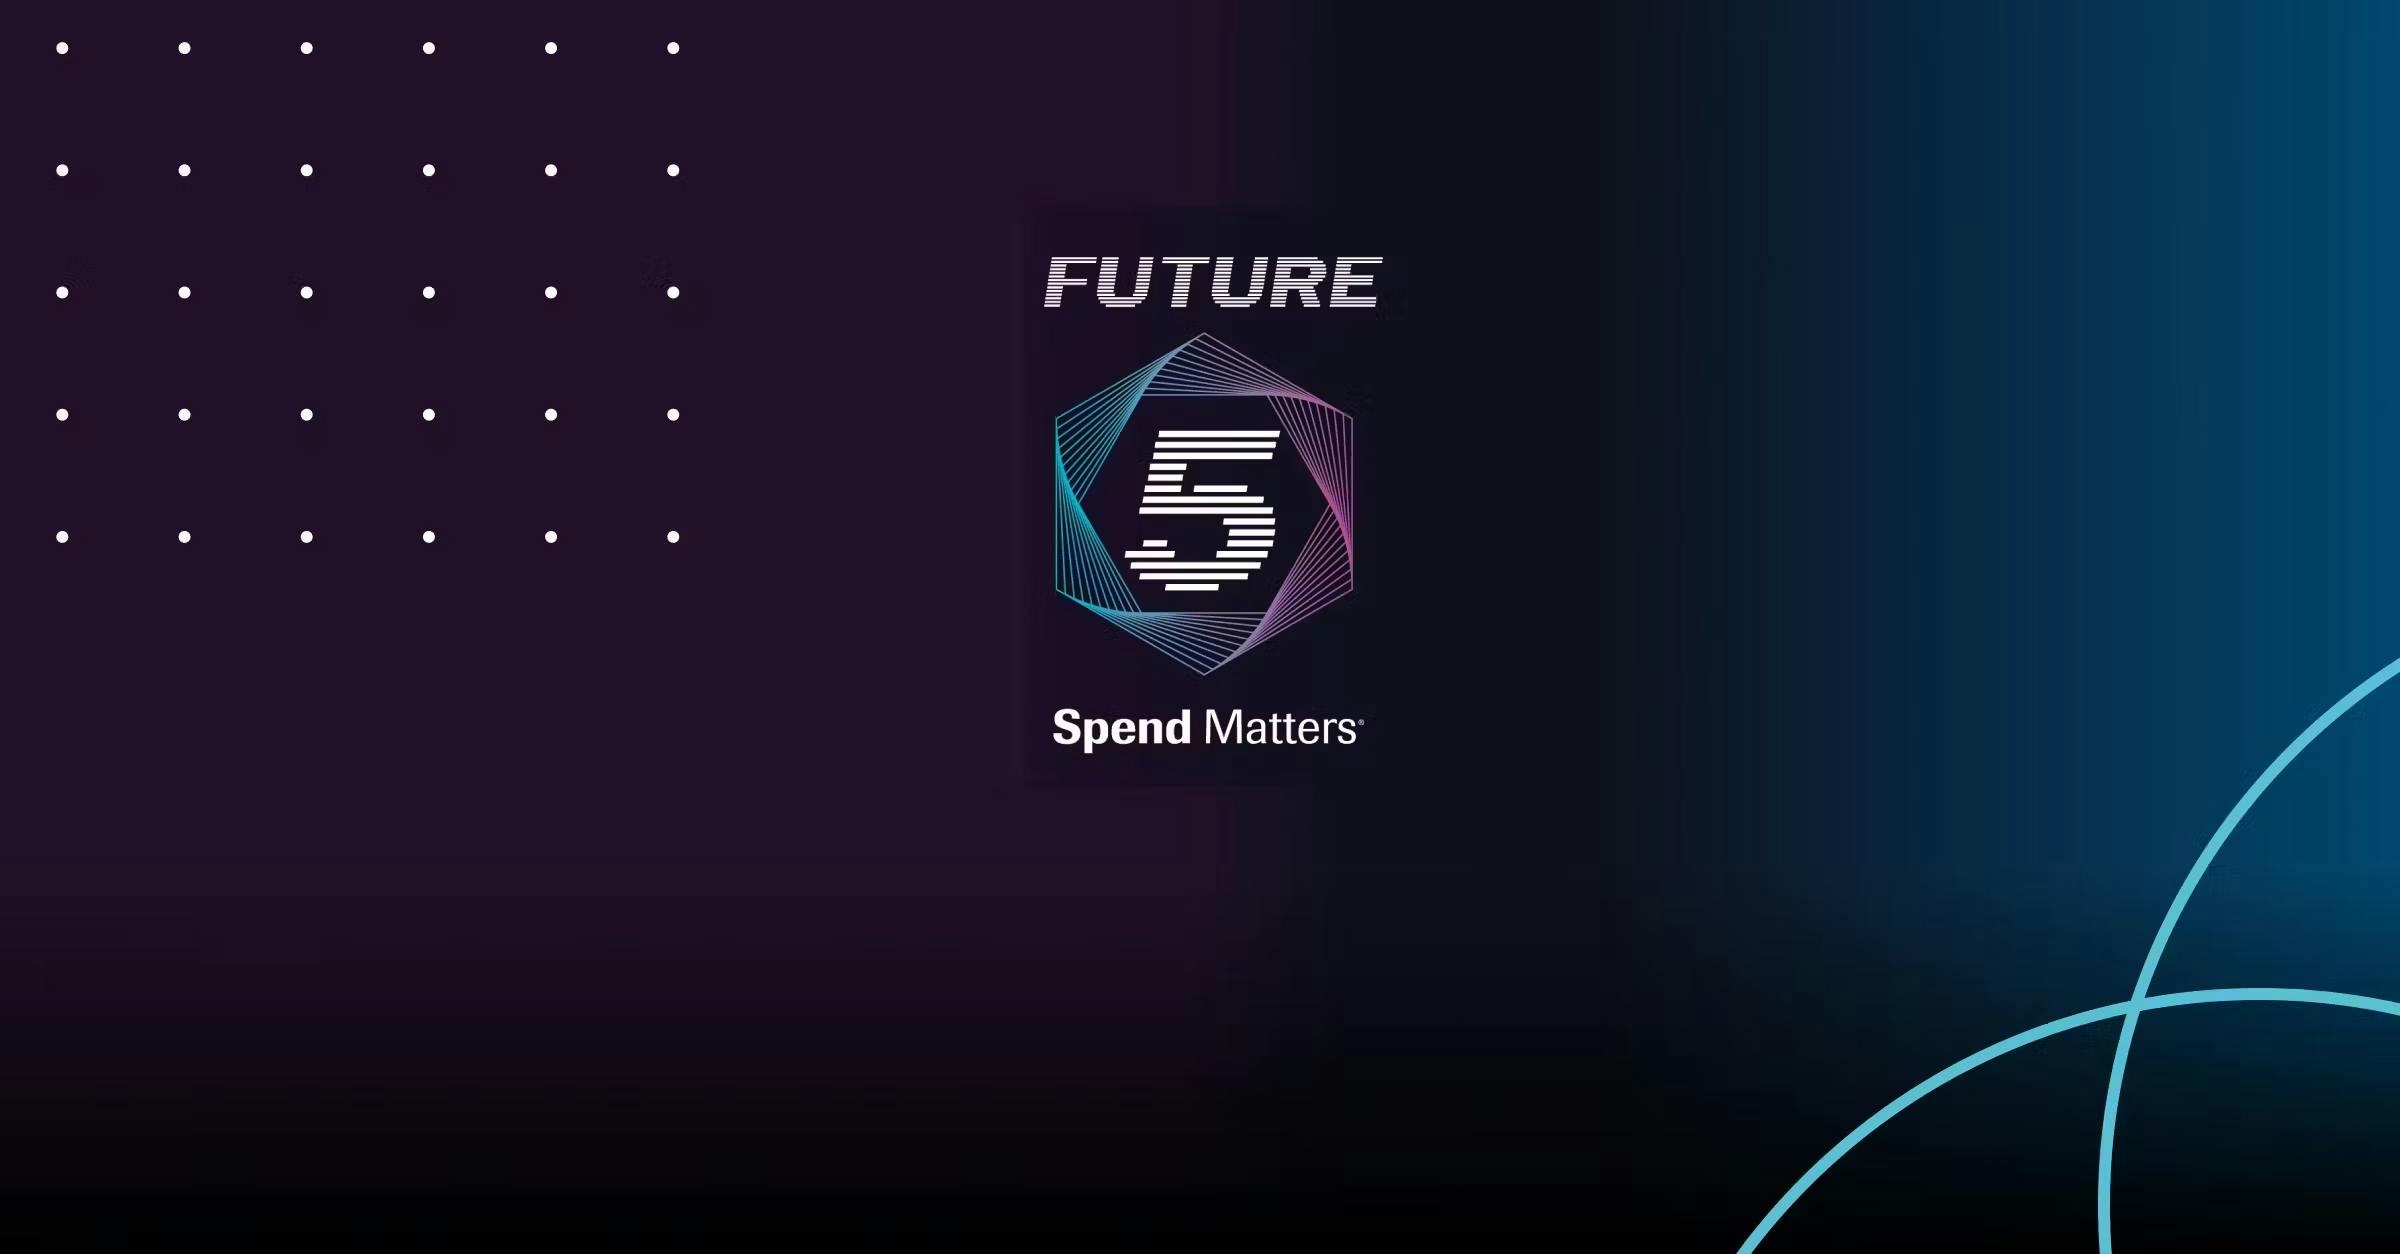 Spend Matters recognizes carbmee as a 2022 “Future 5” start-up